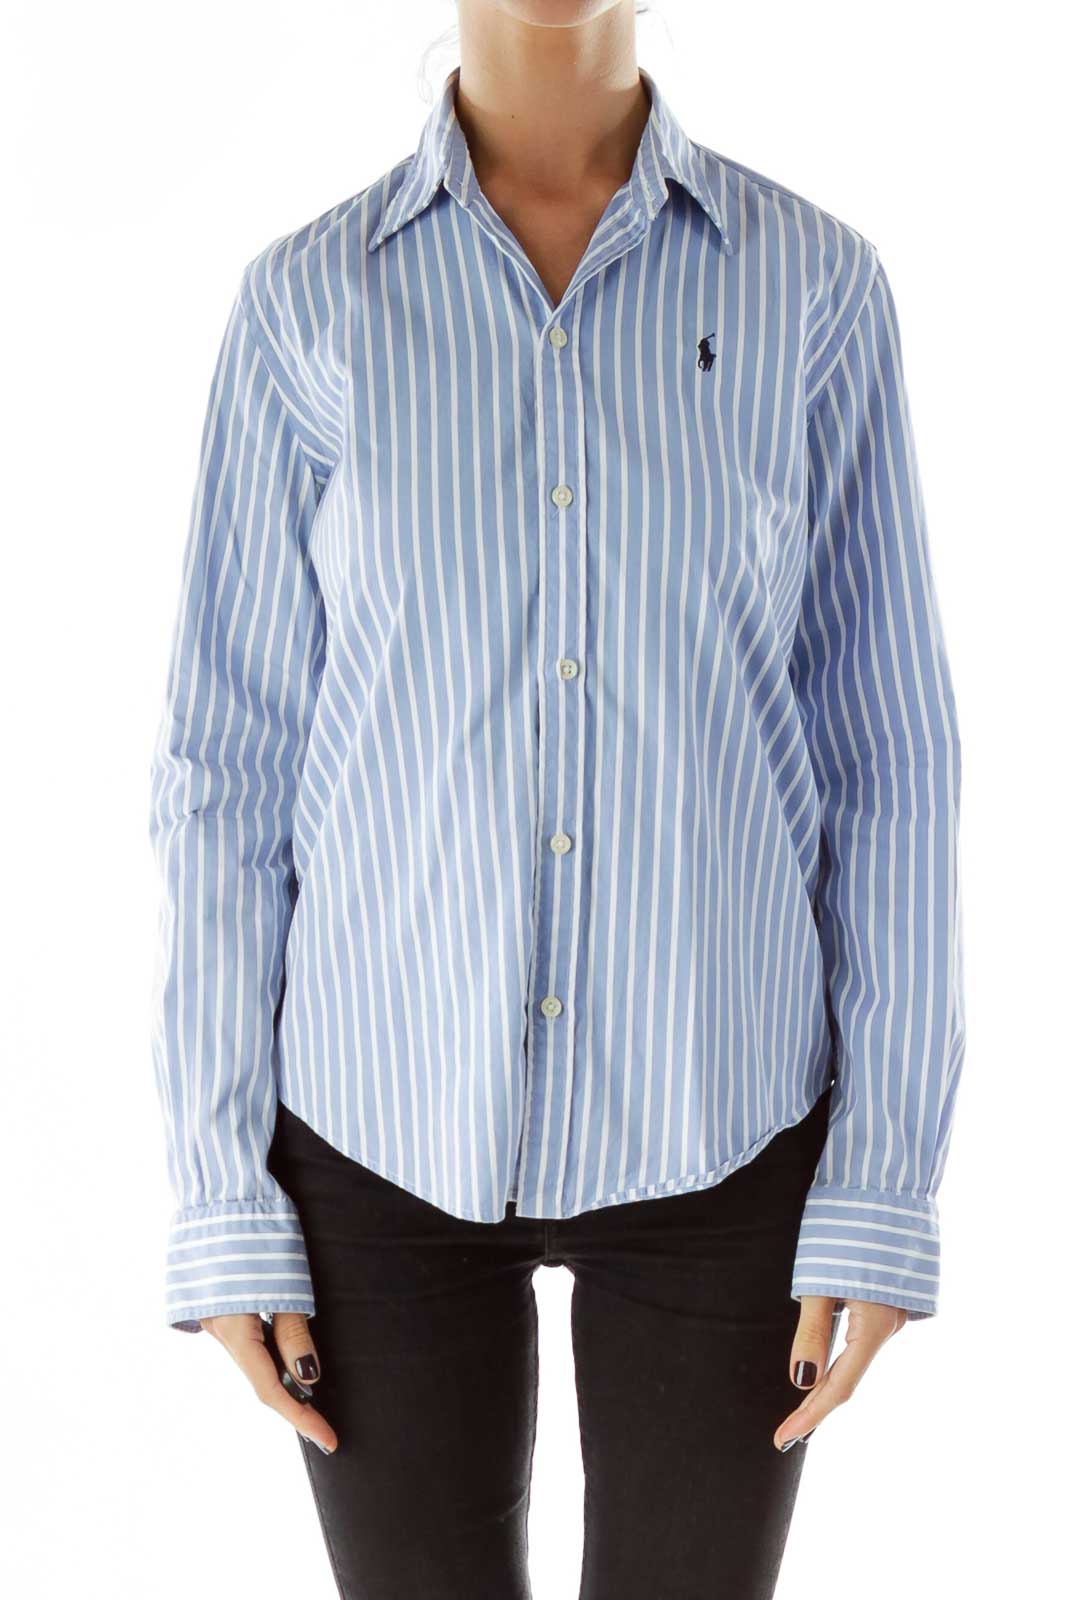 Baby Blue Pinstripe Shirt Front